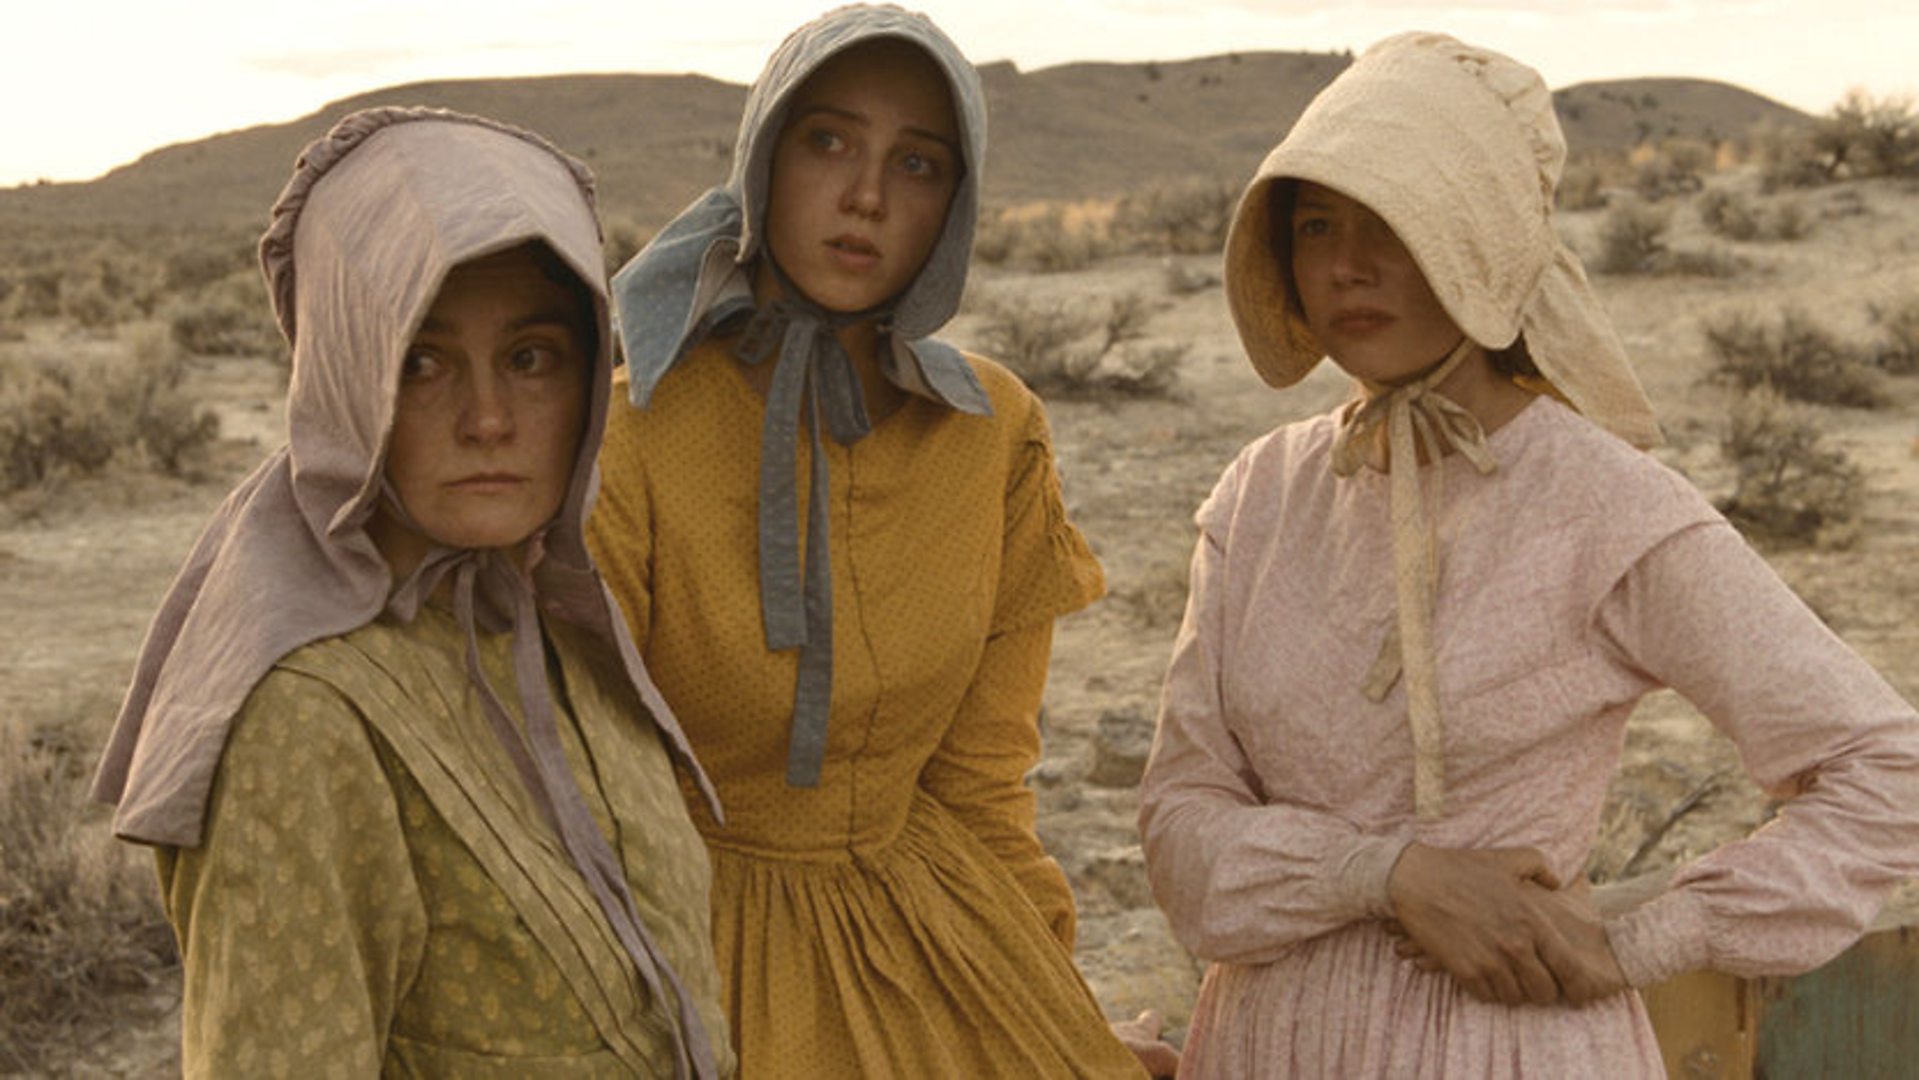 Kelly Reichardt’s ‘Meek’s Cutoff’: The Camera’s Relationship to Characters and Power